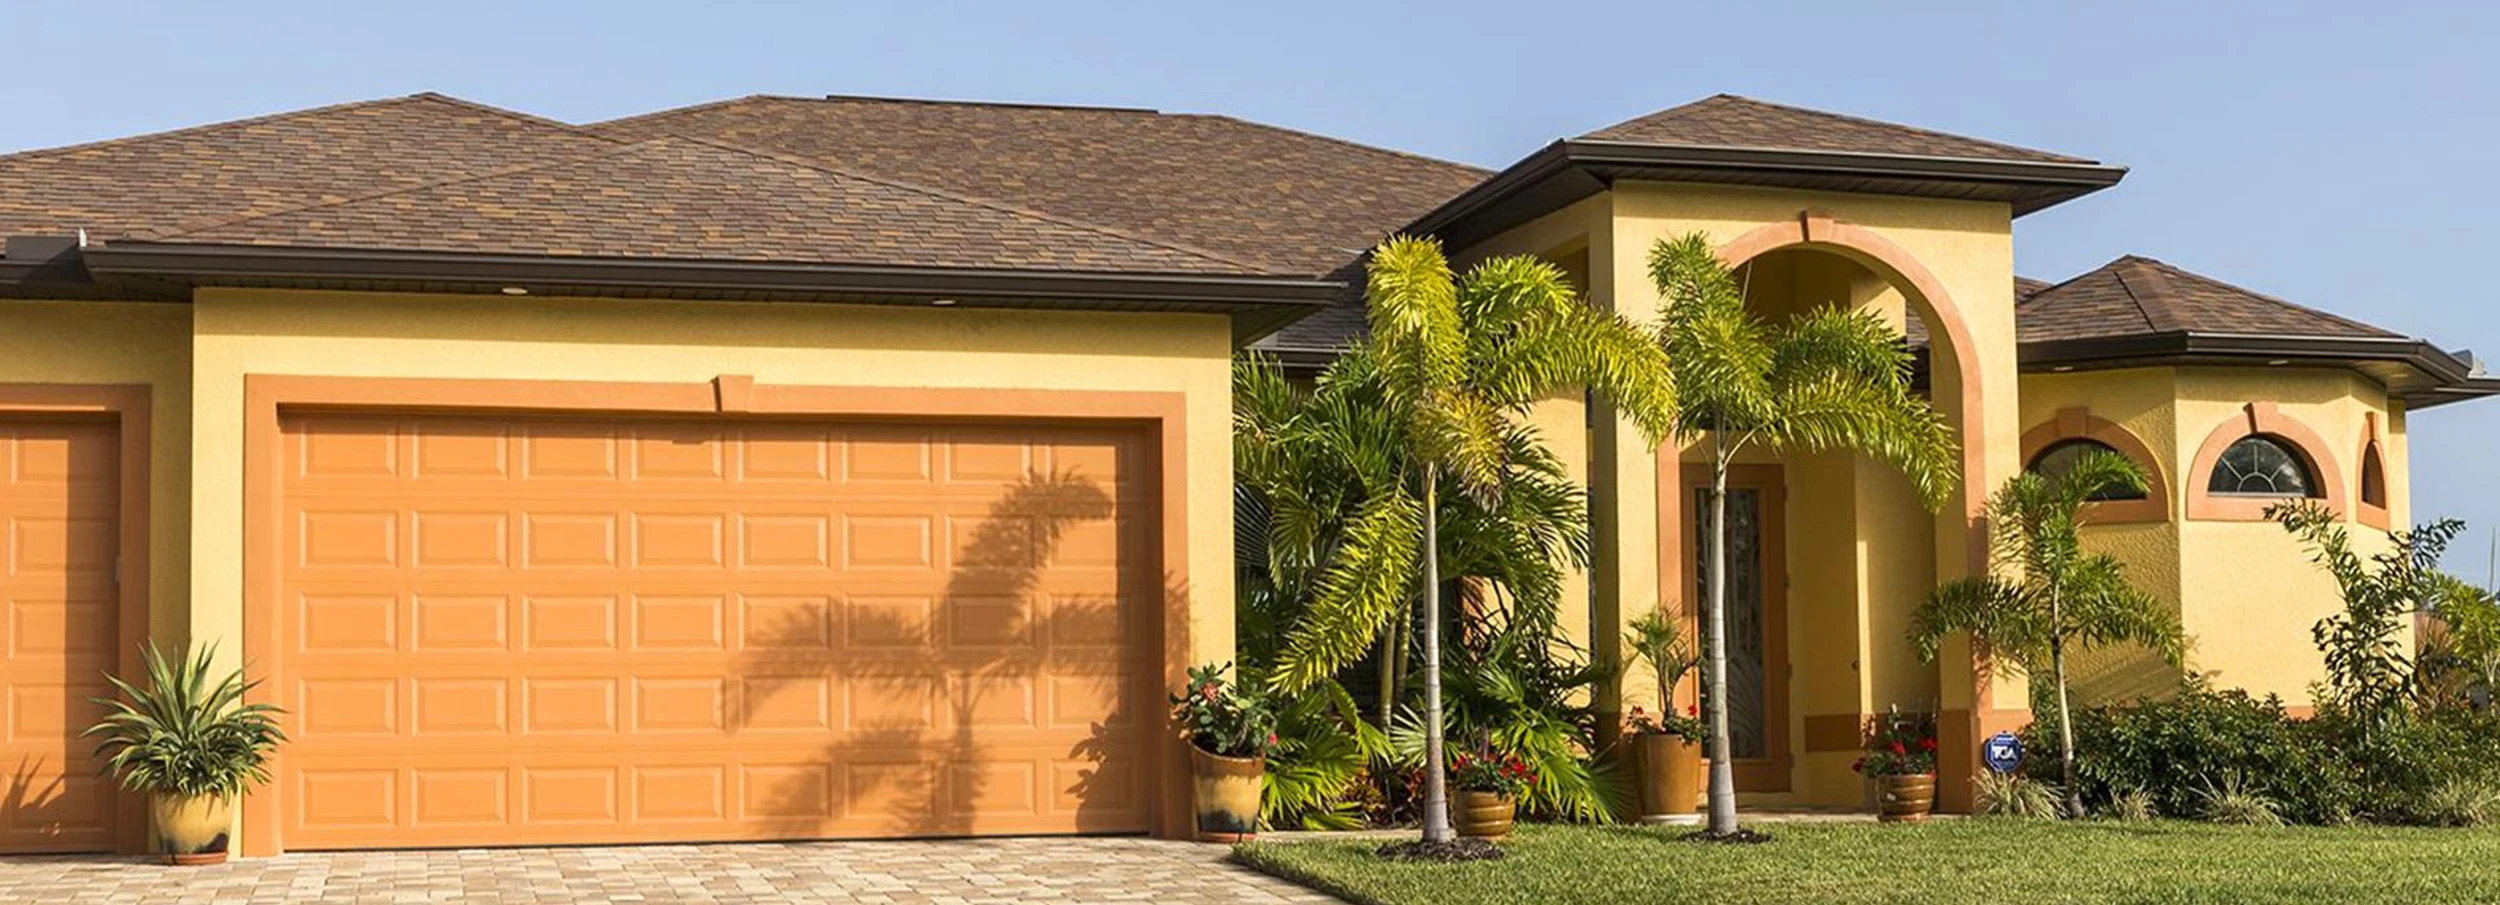 Exterior of large southern home with palm trees.